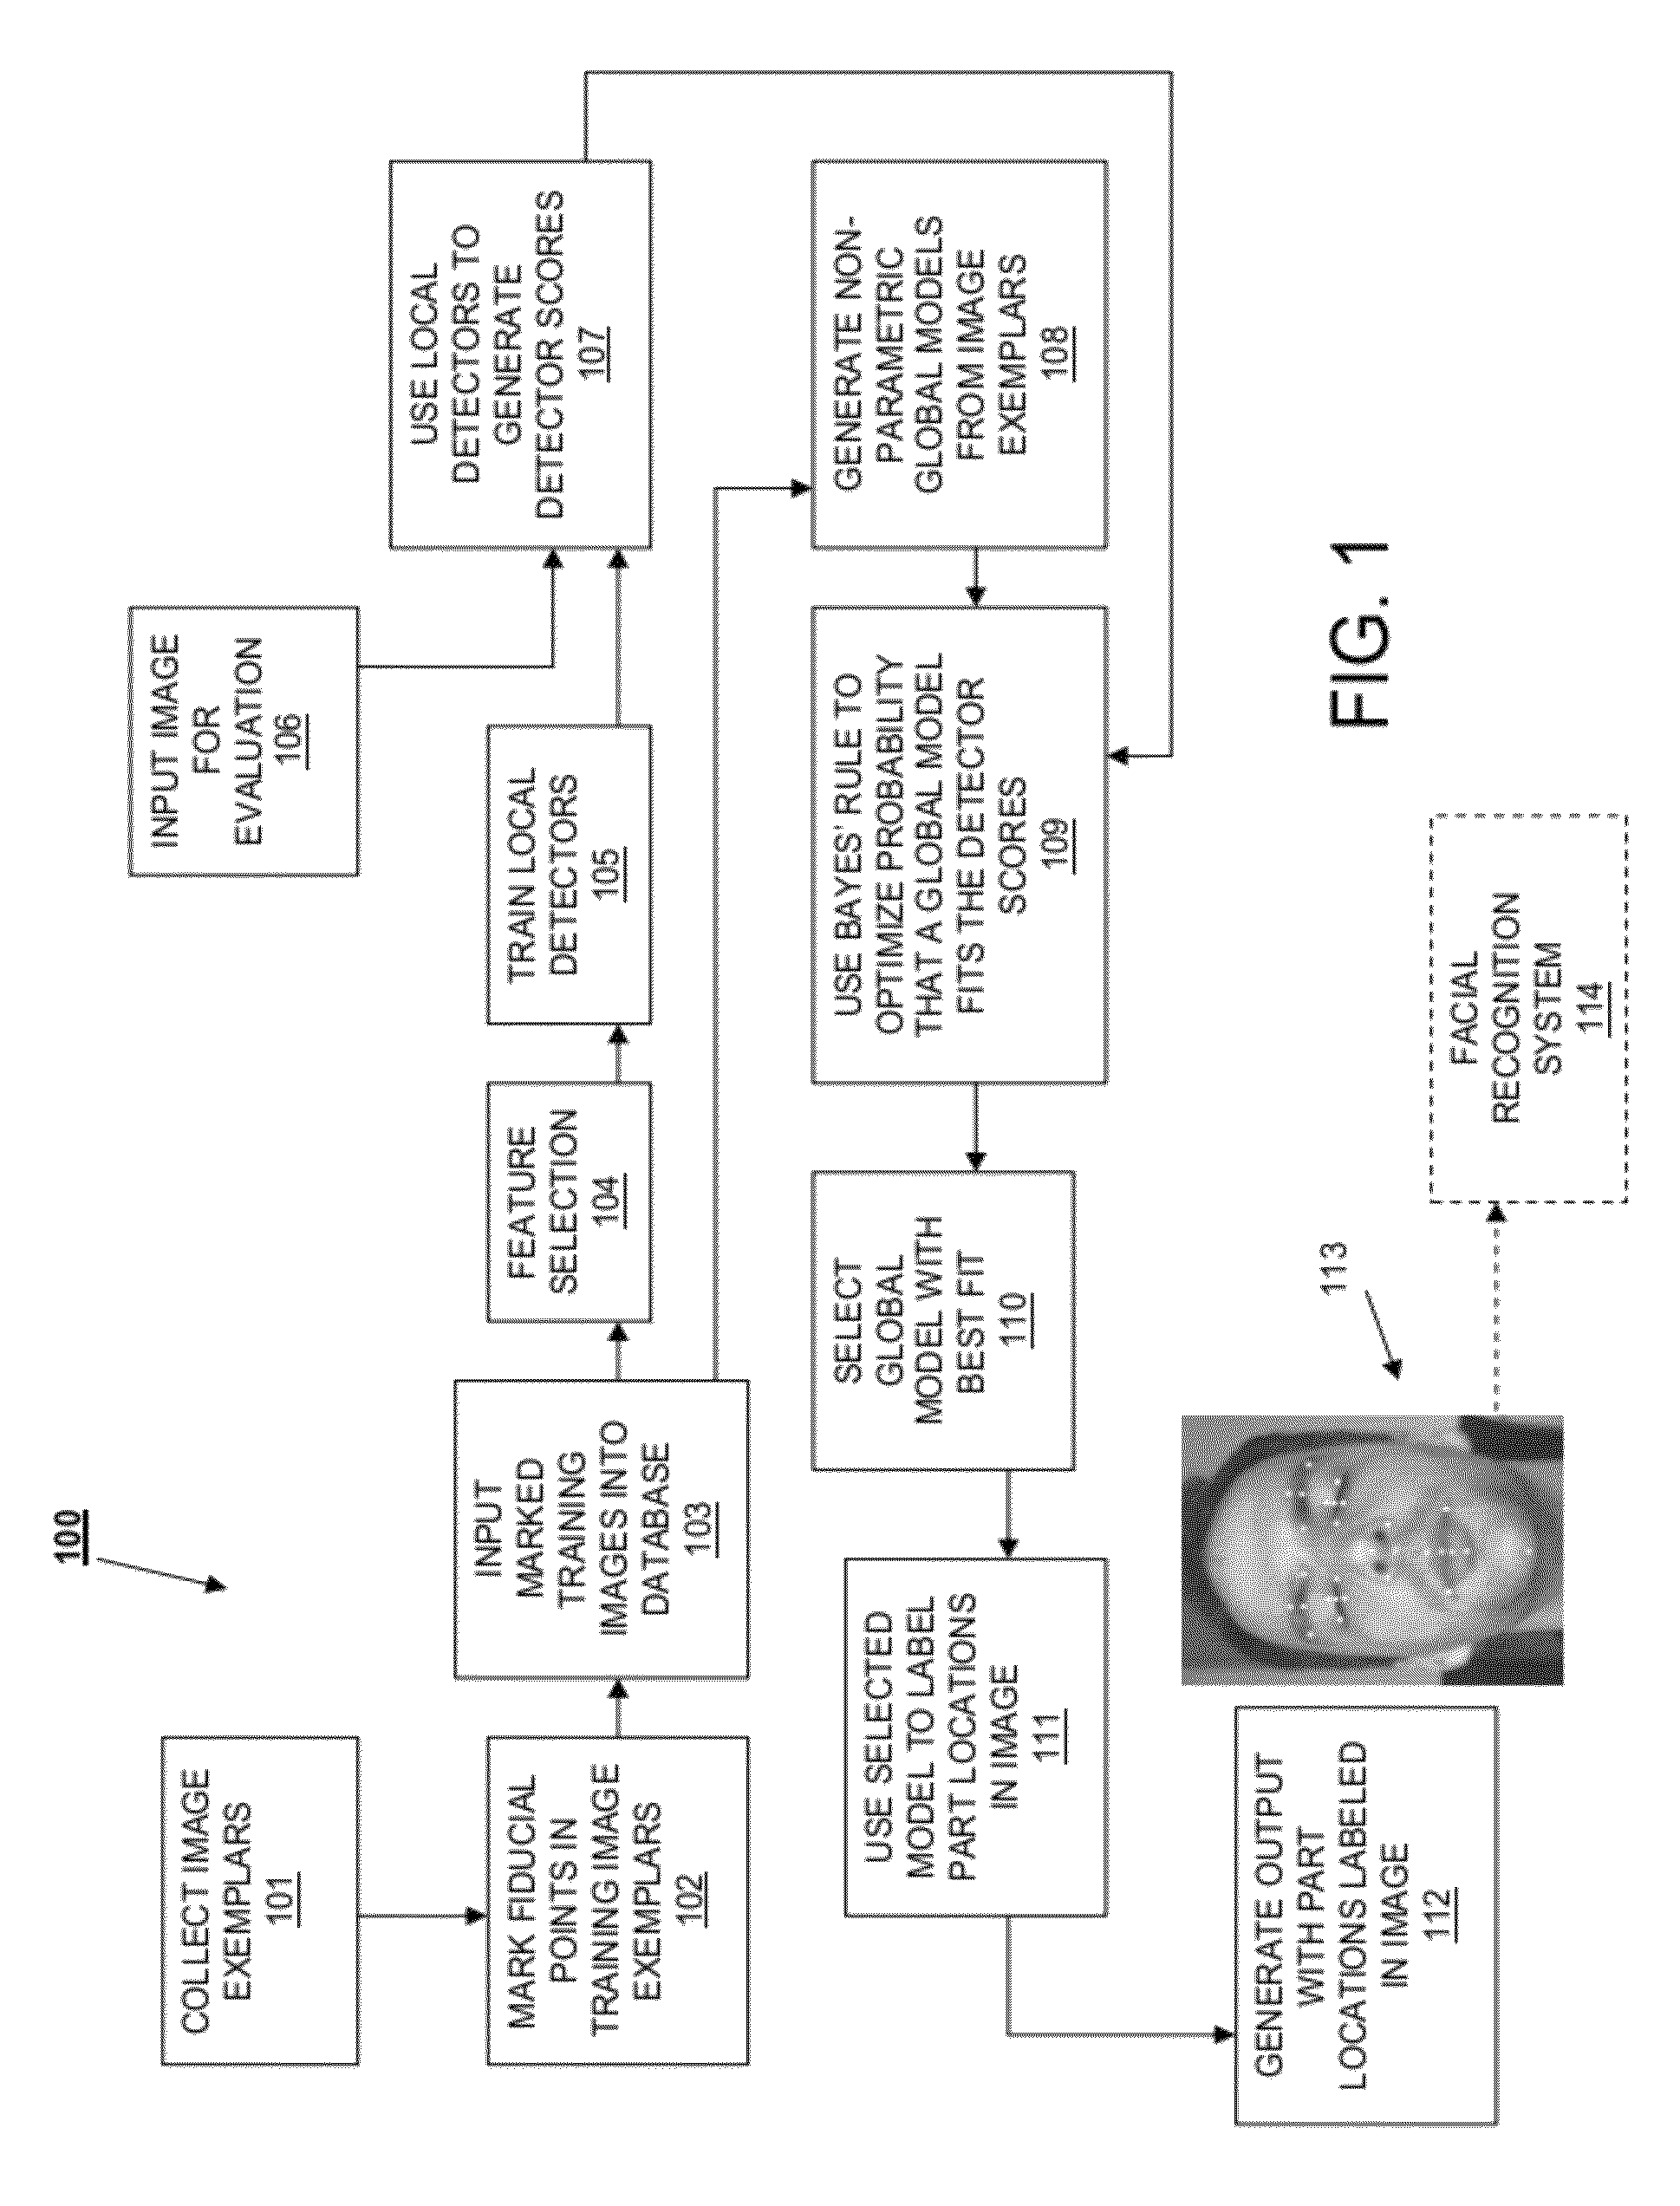 Method and system for localizing parts of an object in an image for computer vision applications